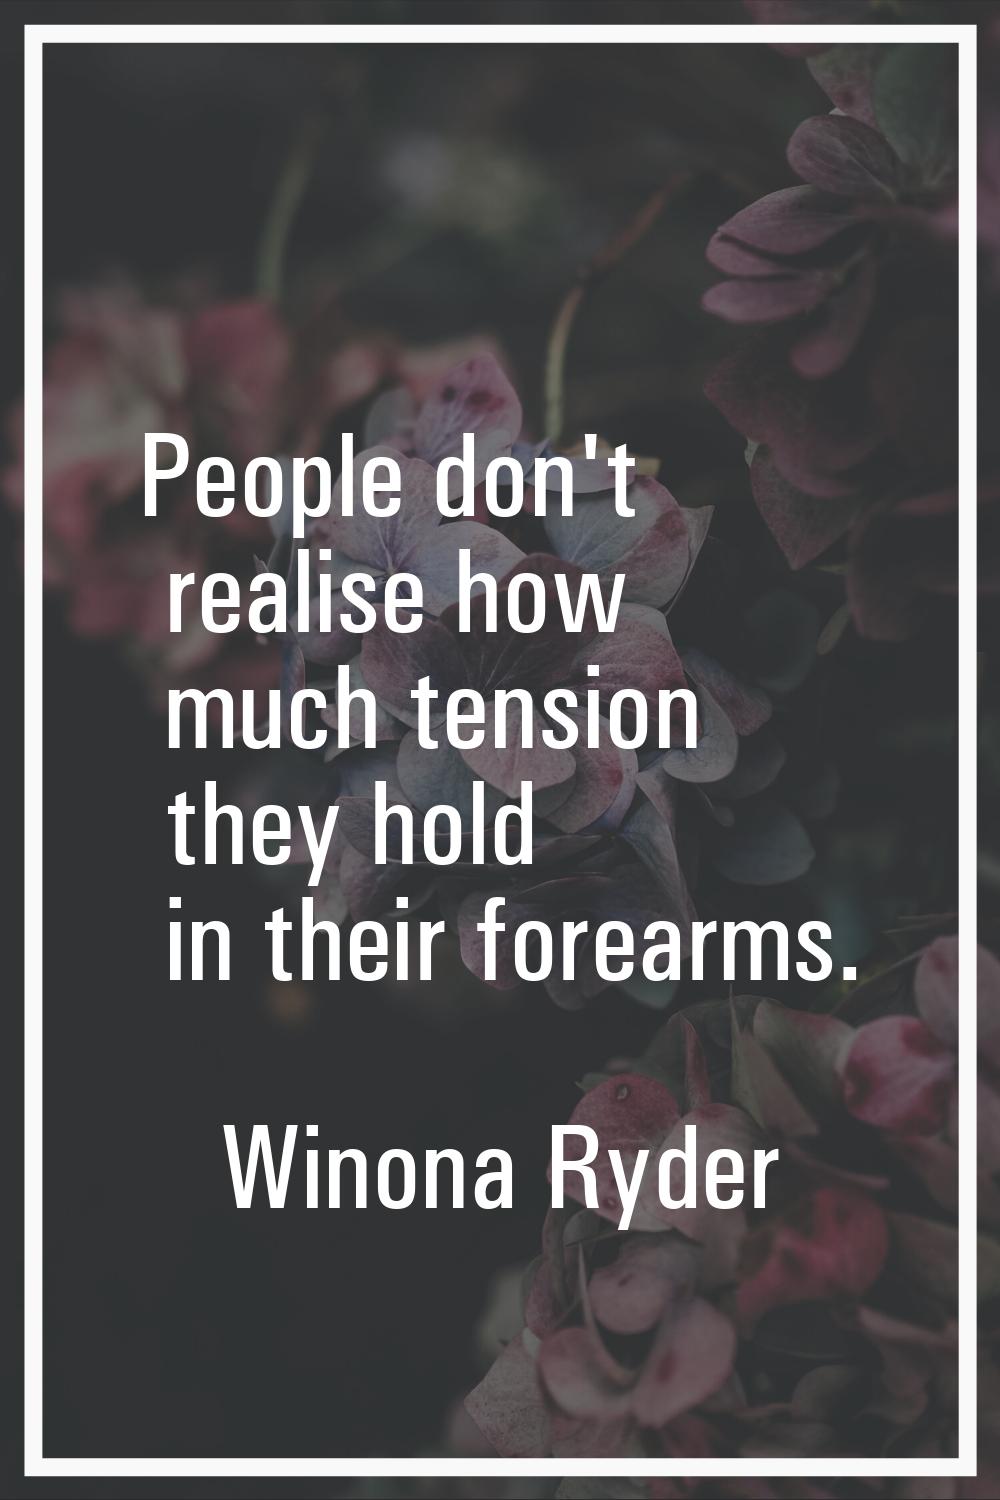 People don't realise how much tension they hold in their forearms.